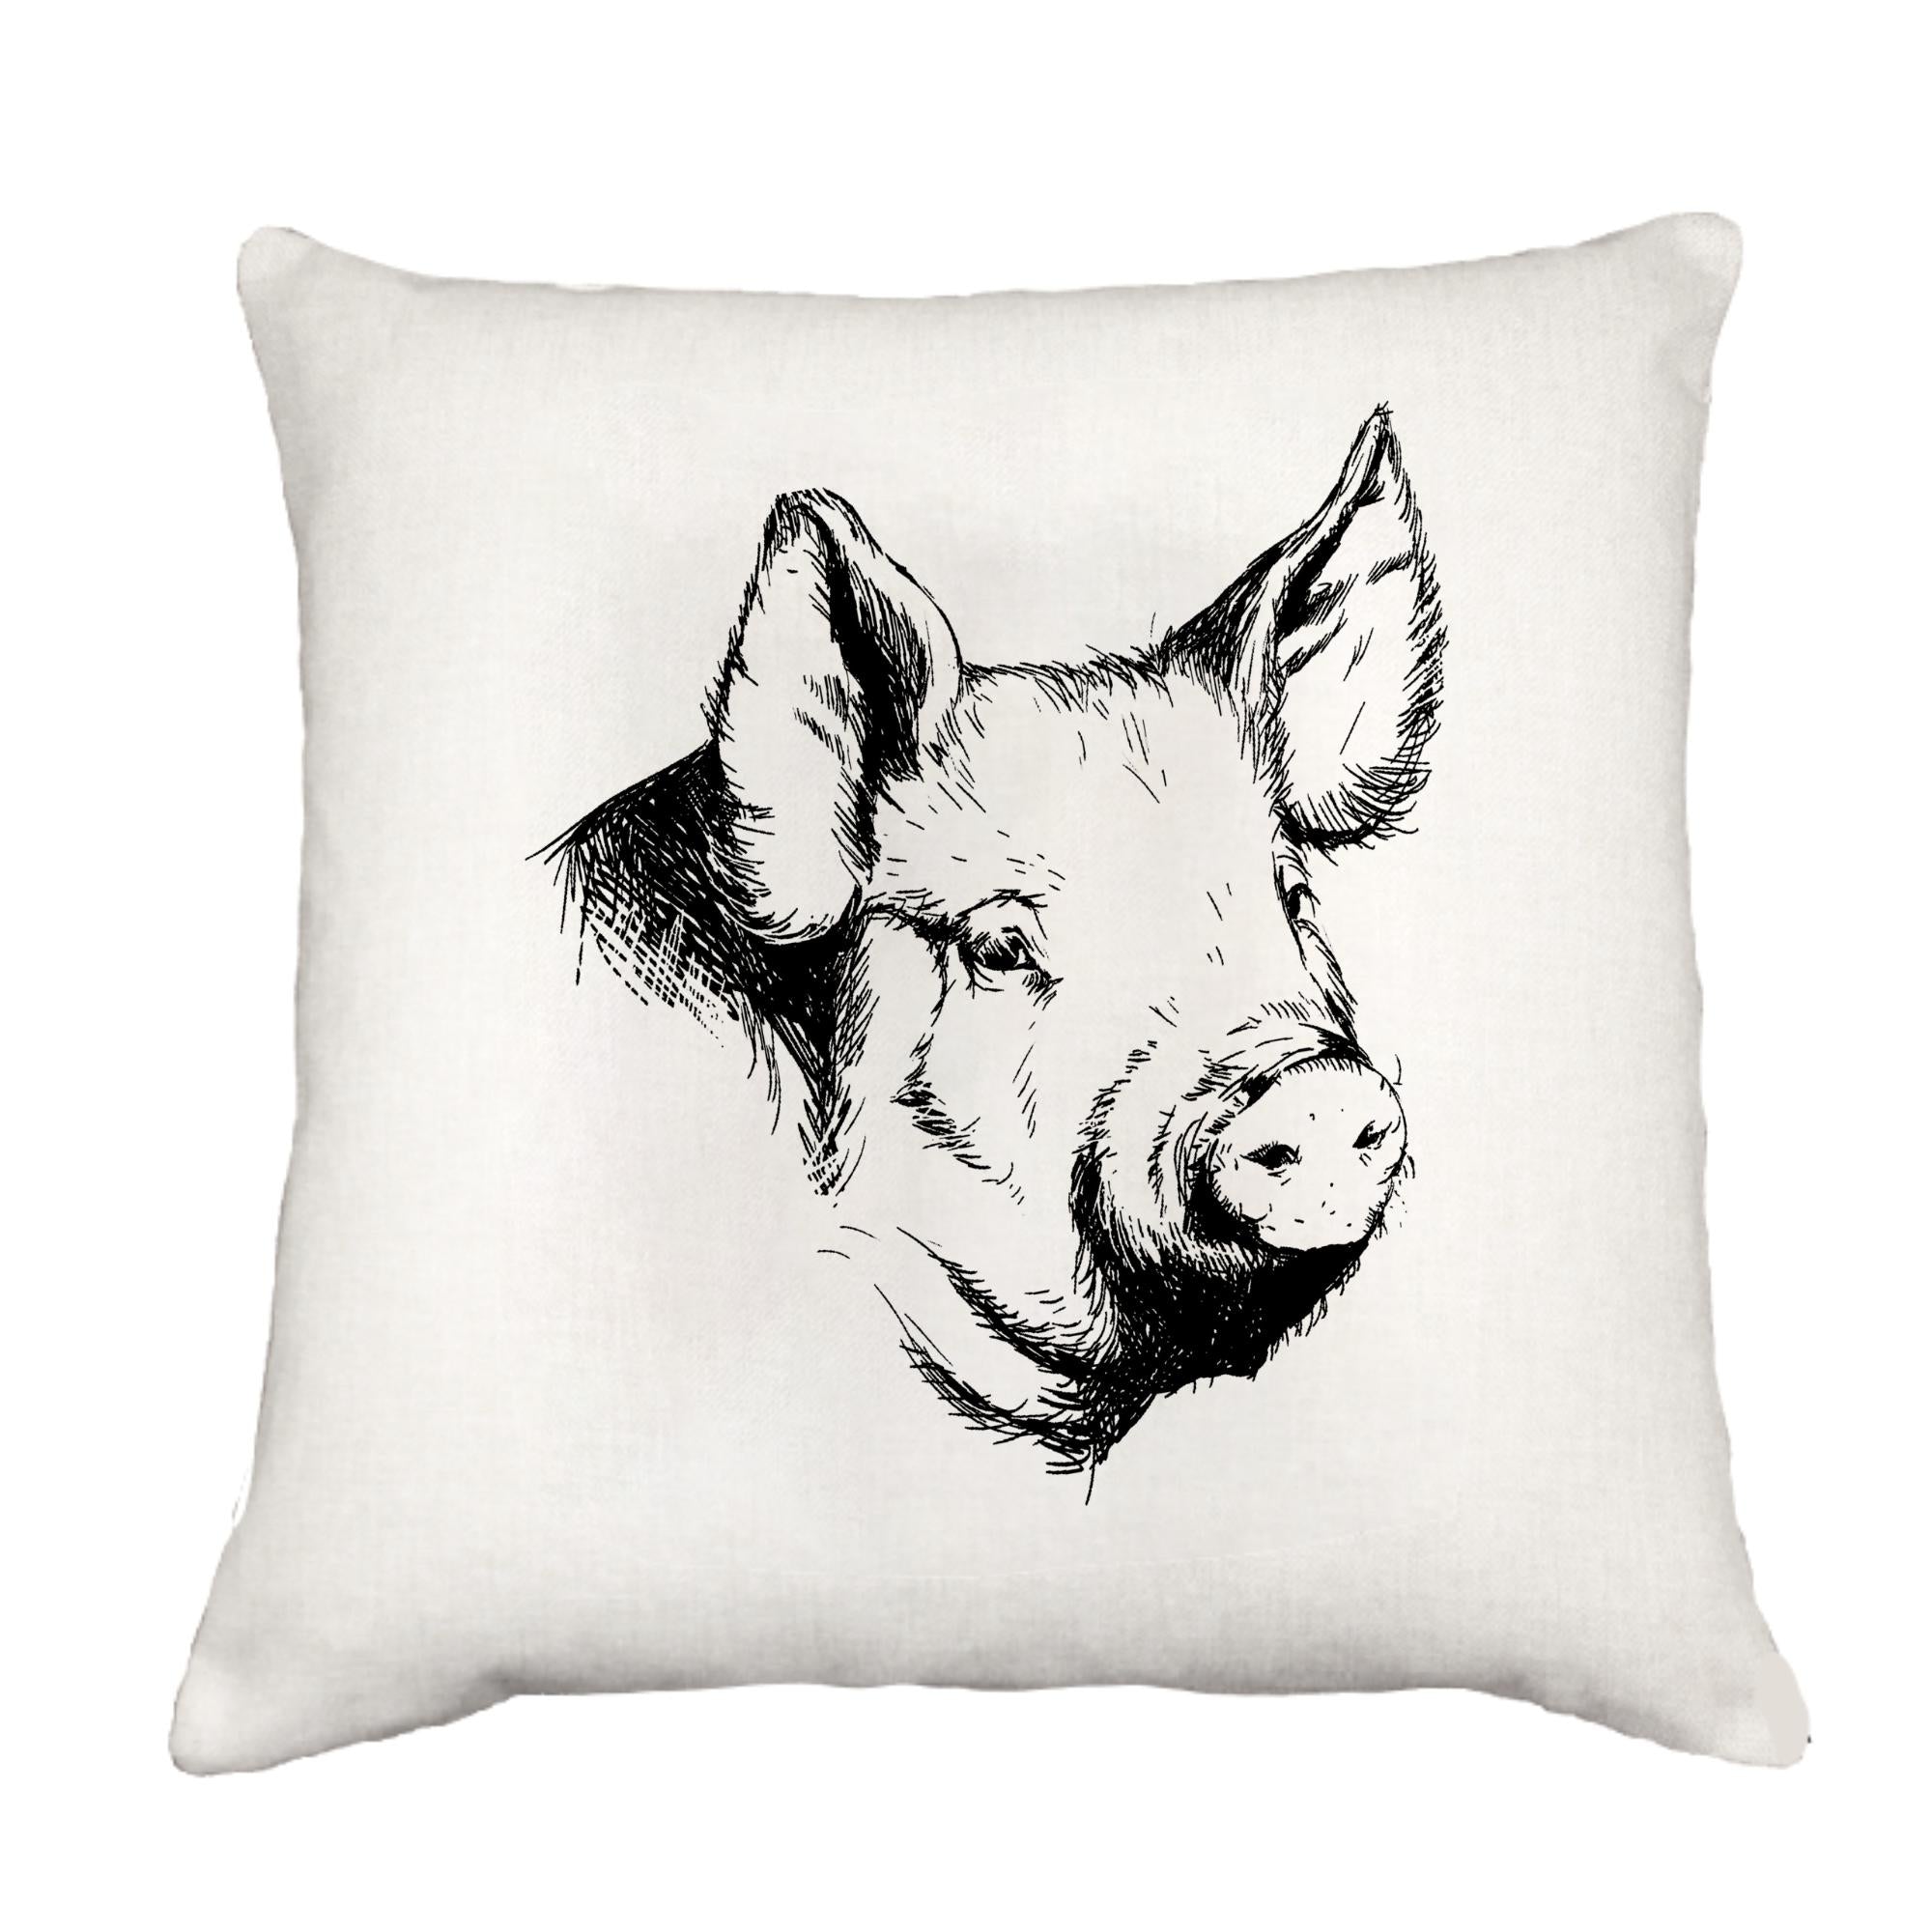 Pig Cottage Pillow Throw/Decorative Pillow - Southern Sisters